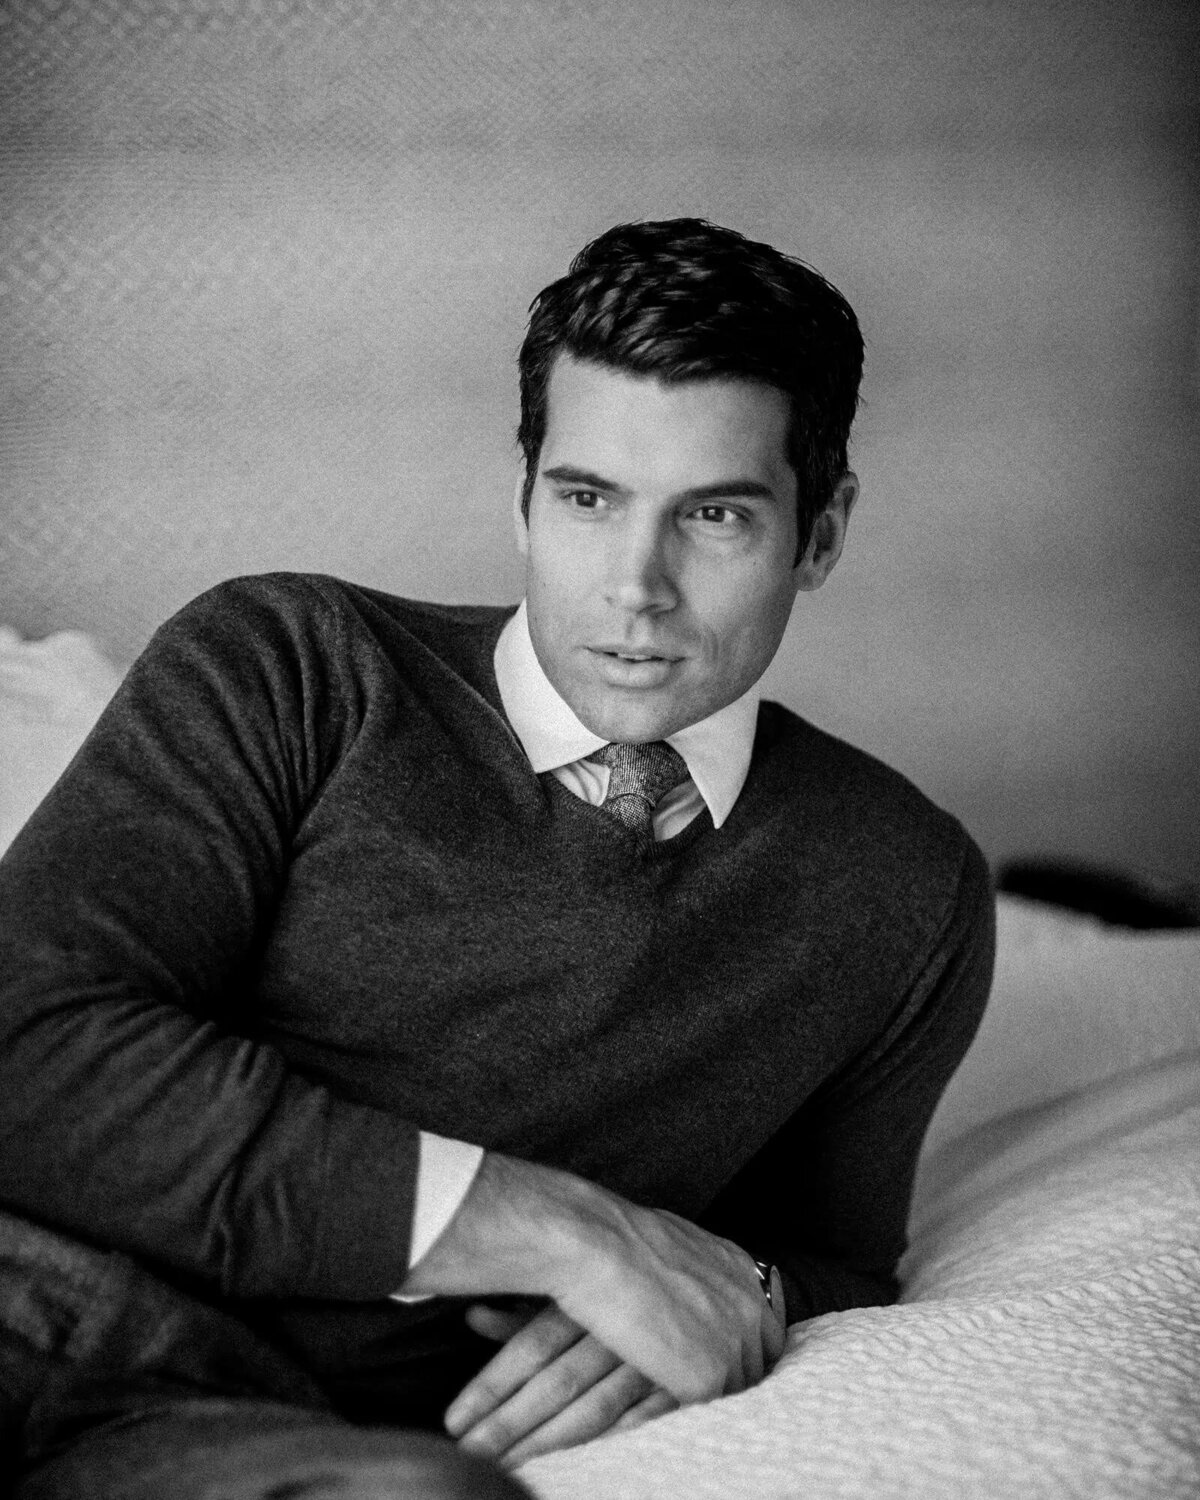 A man in a sweater leaning back on a bed.